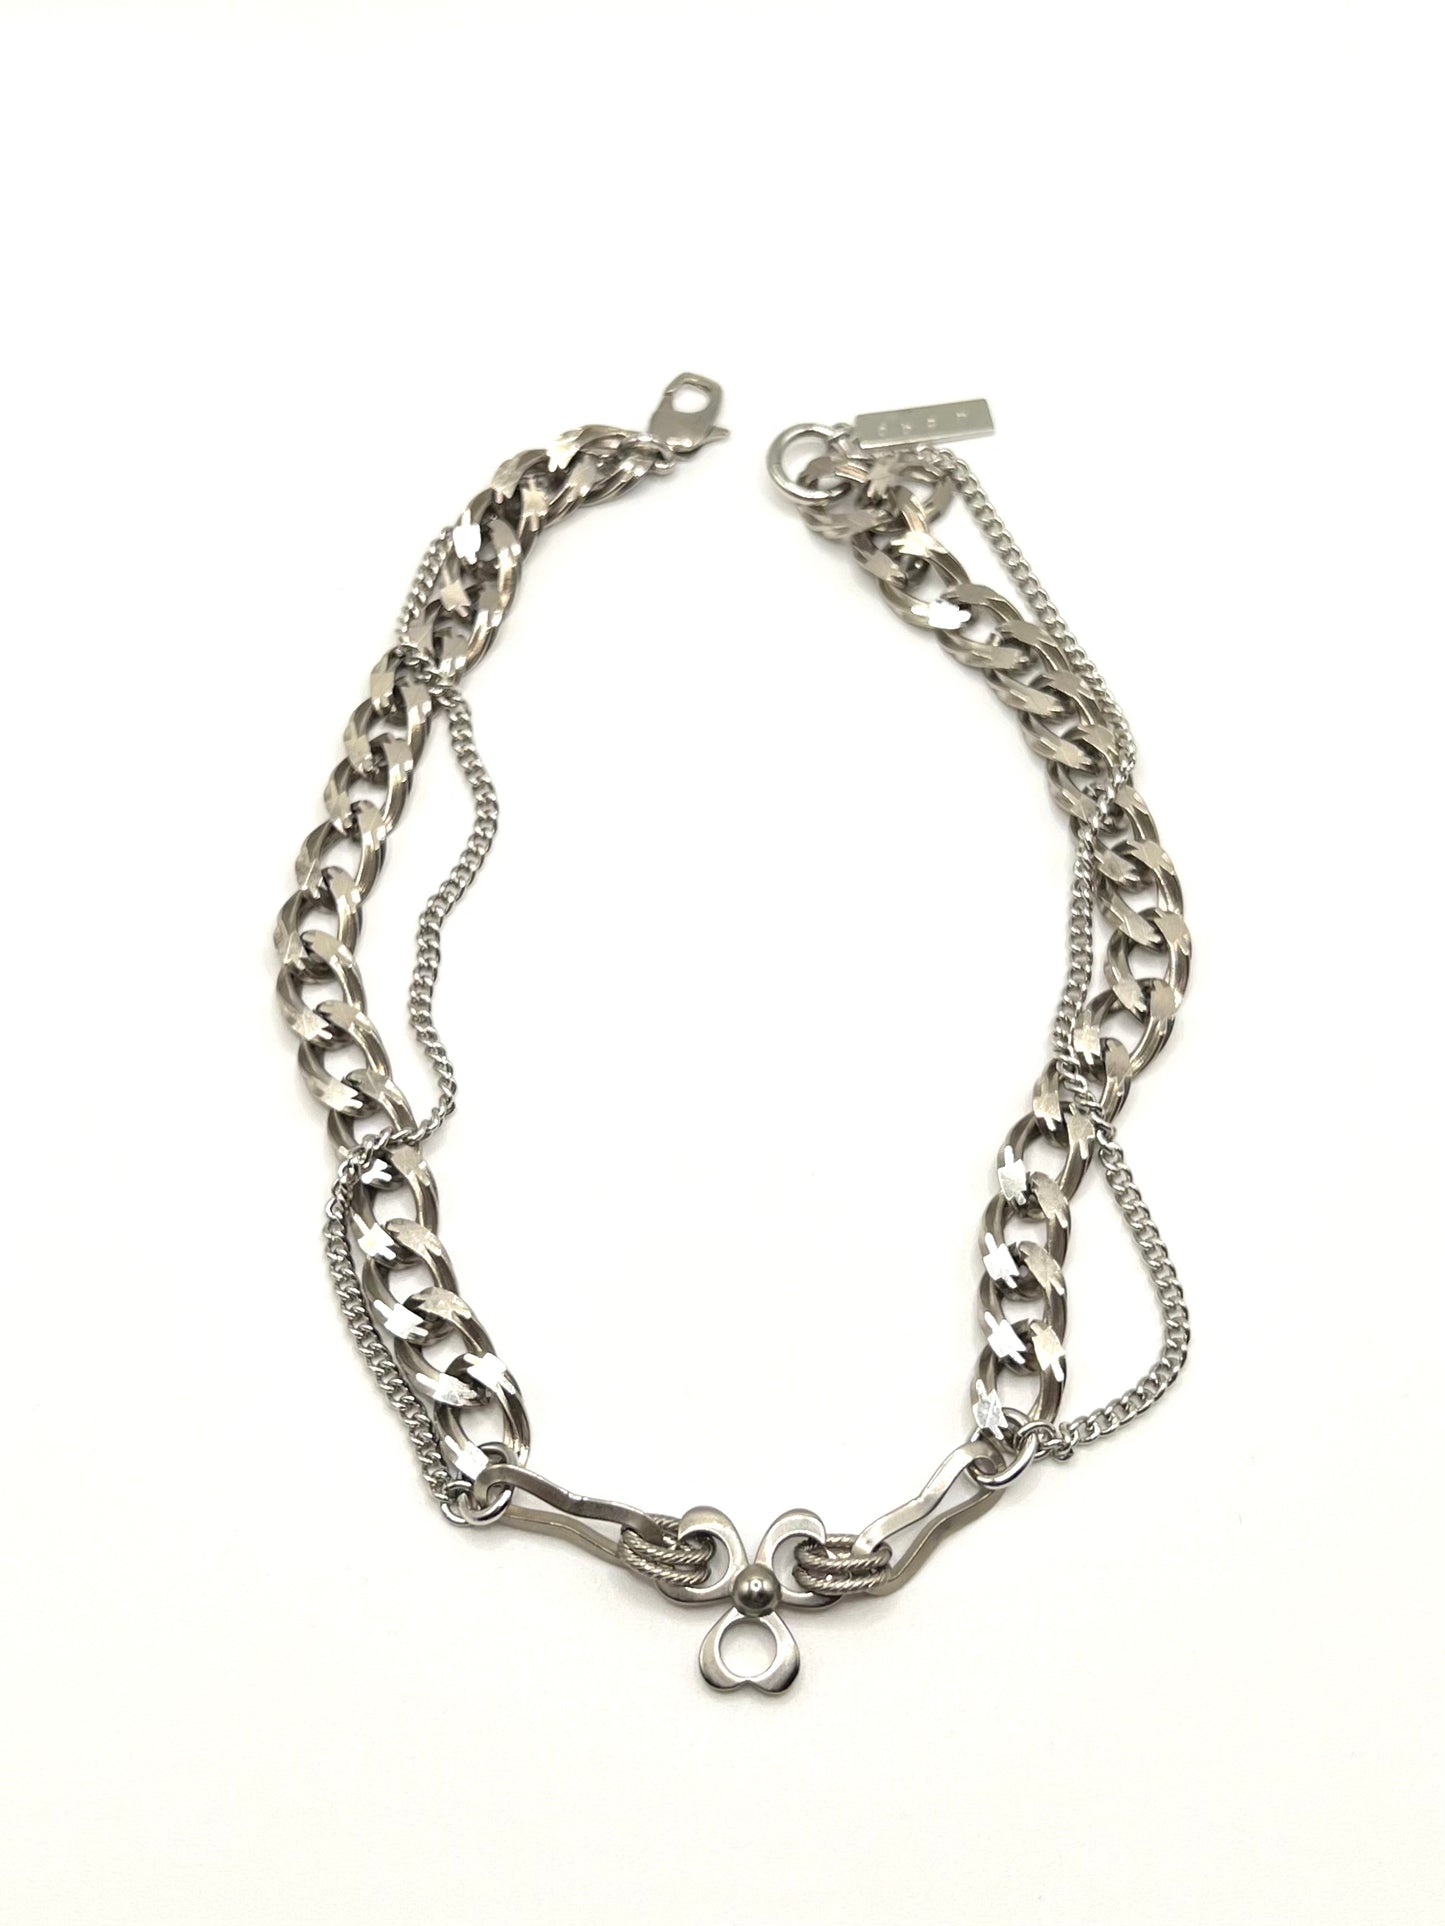 Chain combination necklace - A